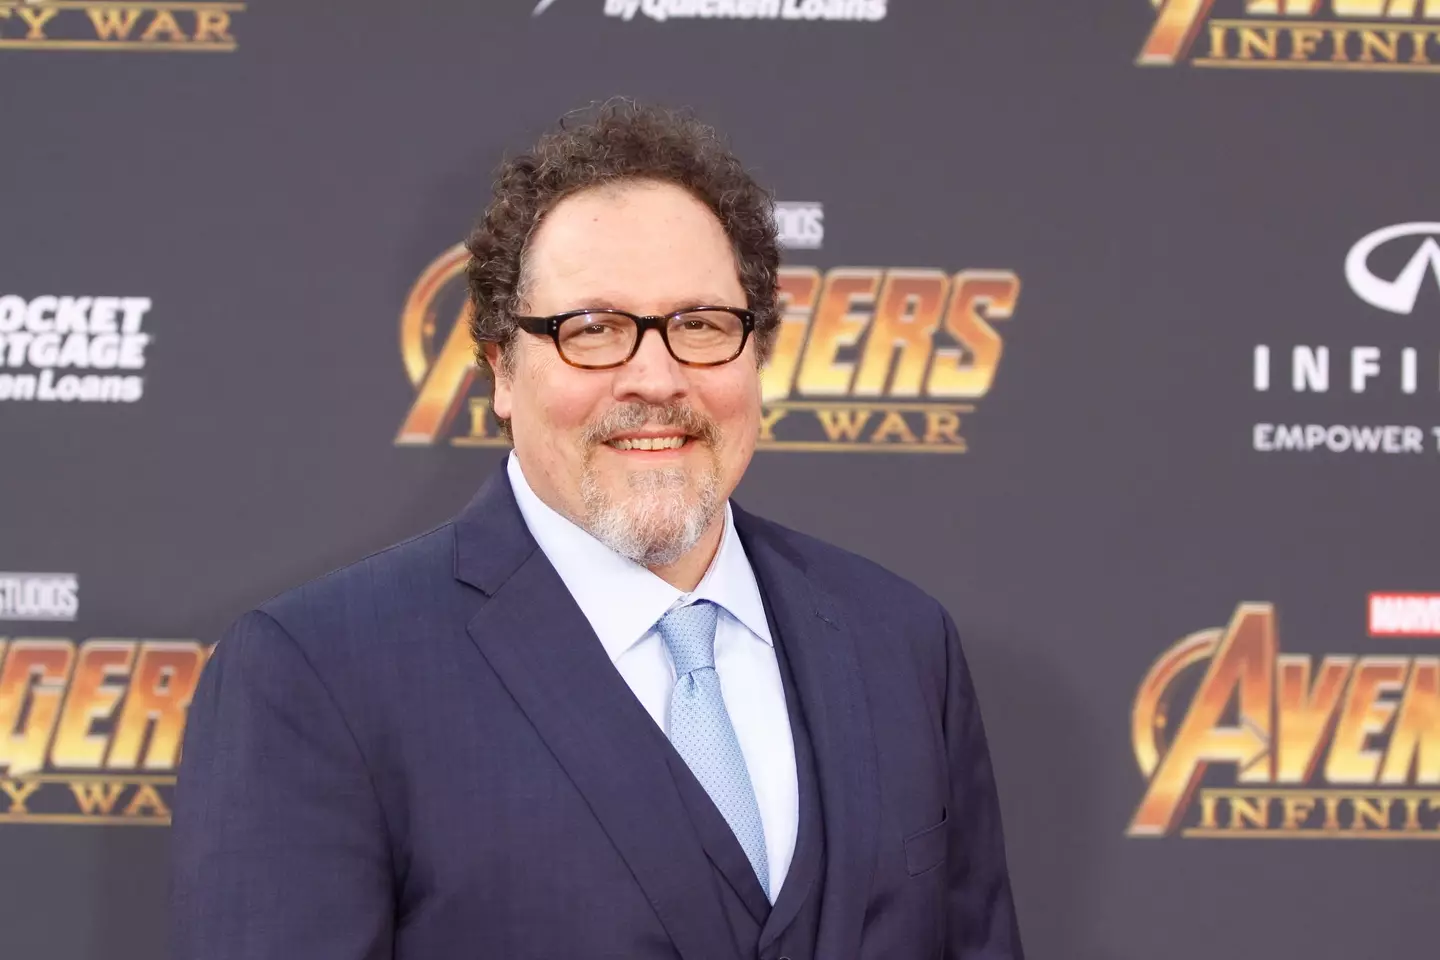 Jon Favreau isn’t all too impressed about the behind-the-scenes politics between Disney and Sony, it's been revealed.